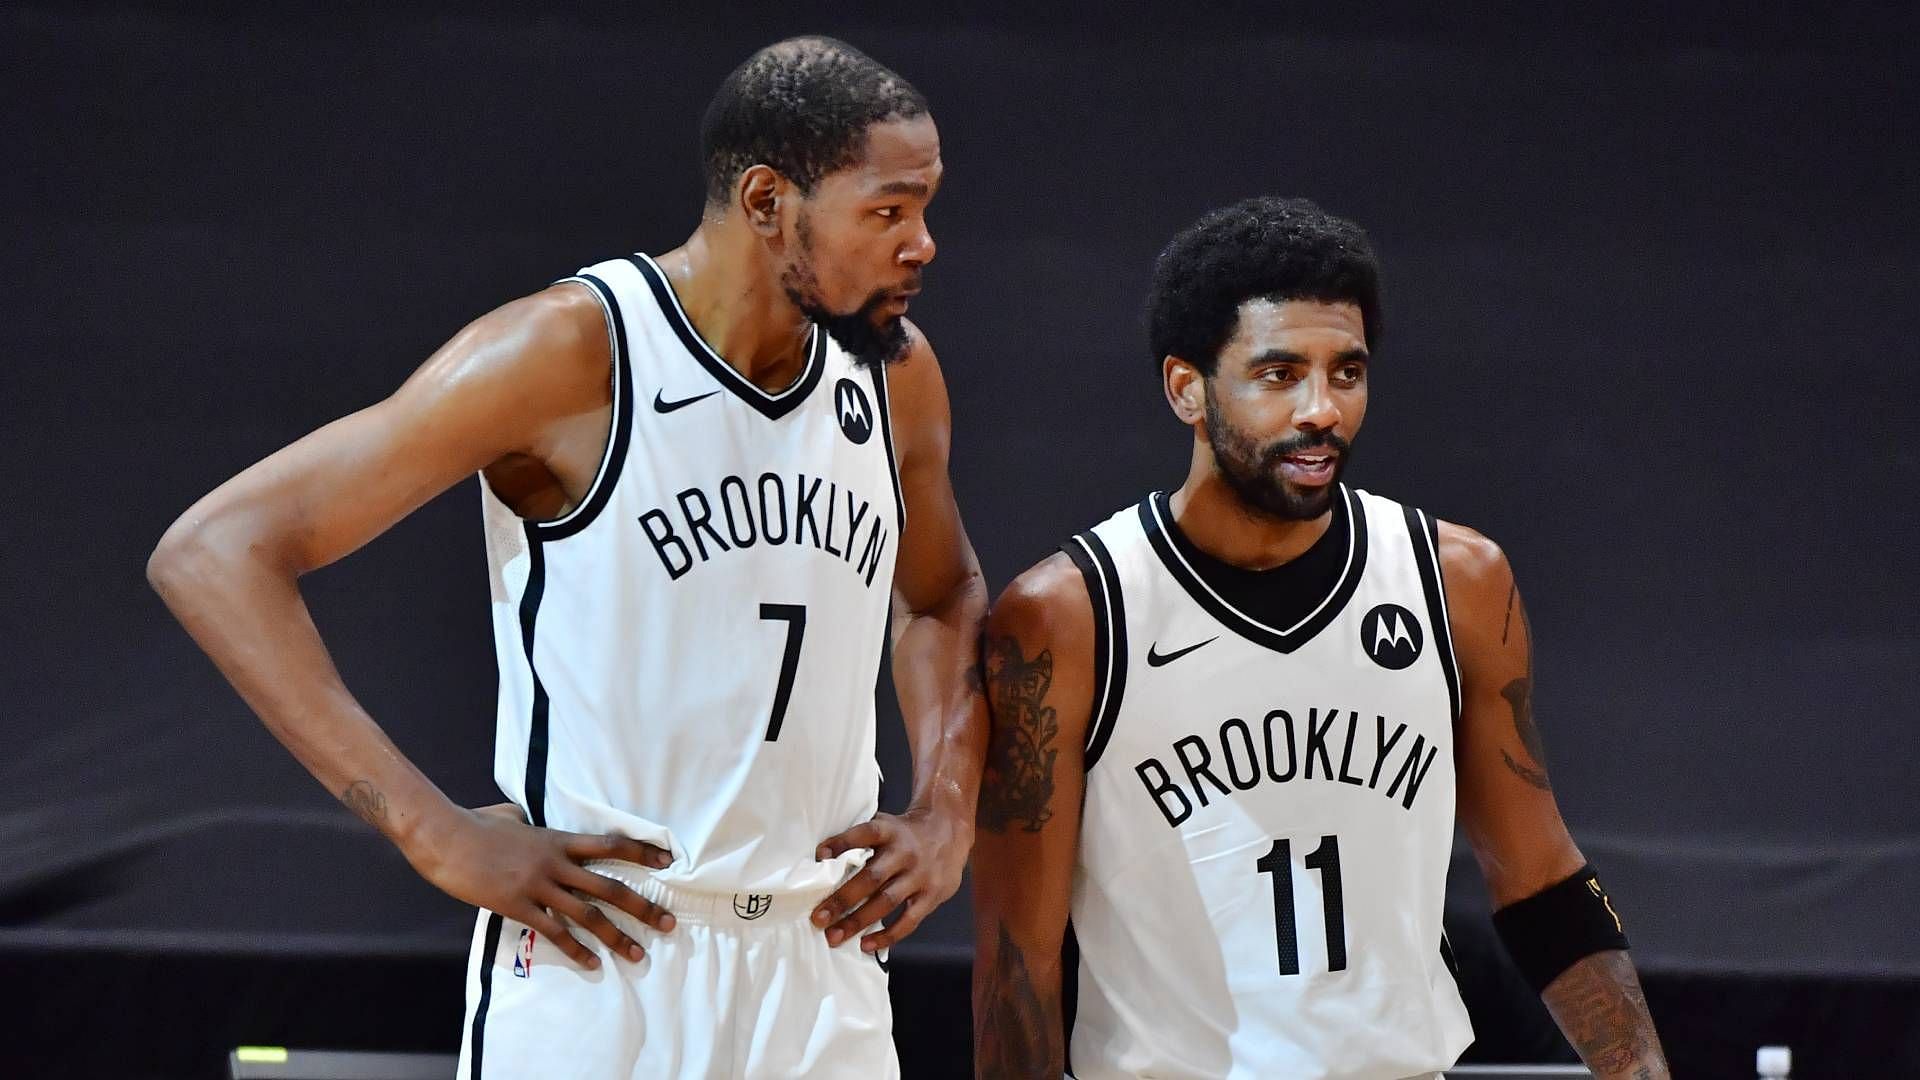 Kyrie Irving has already confirmed he wants to stay with the Brooklyn Nets. [Photo: Sporting News]